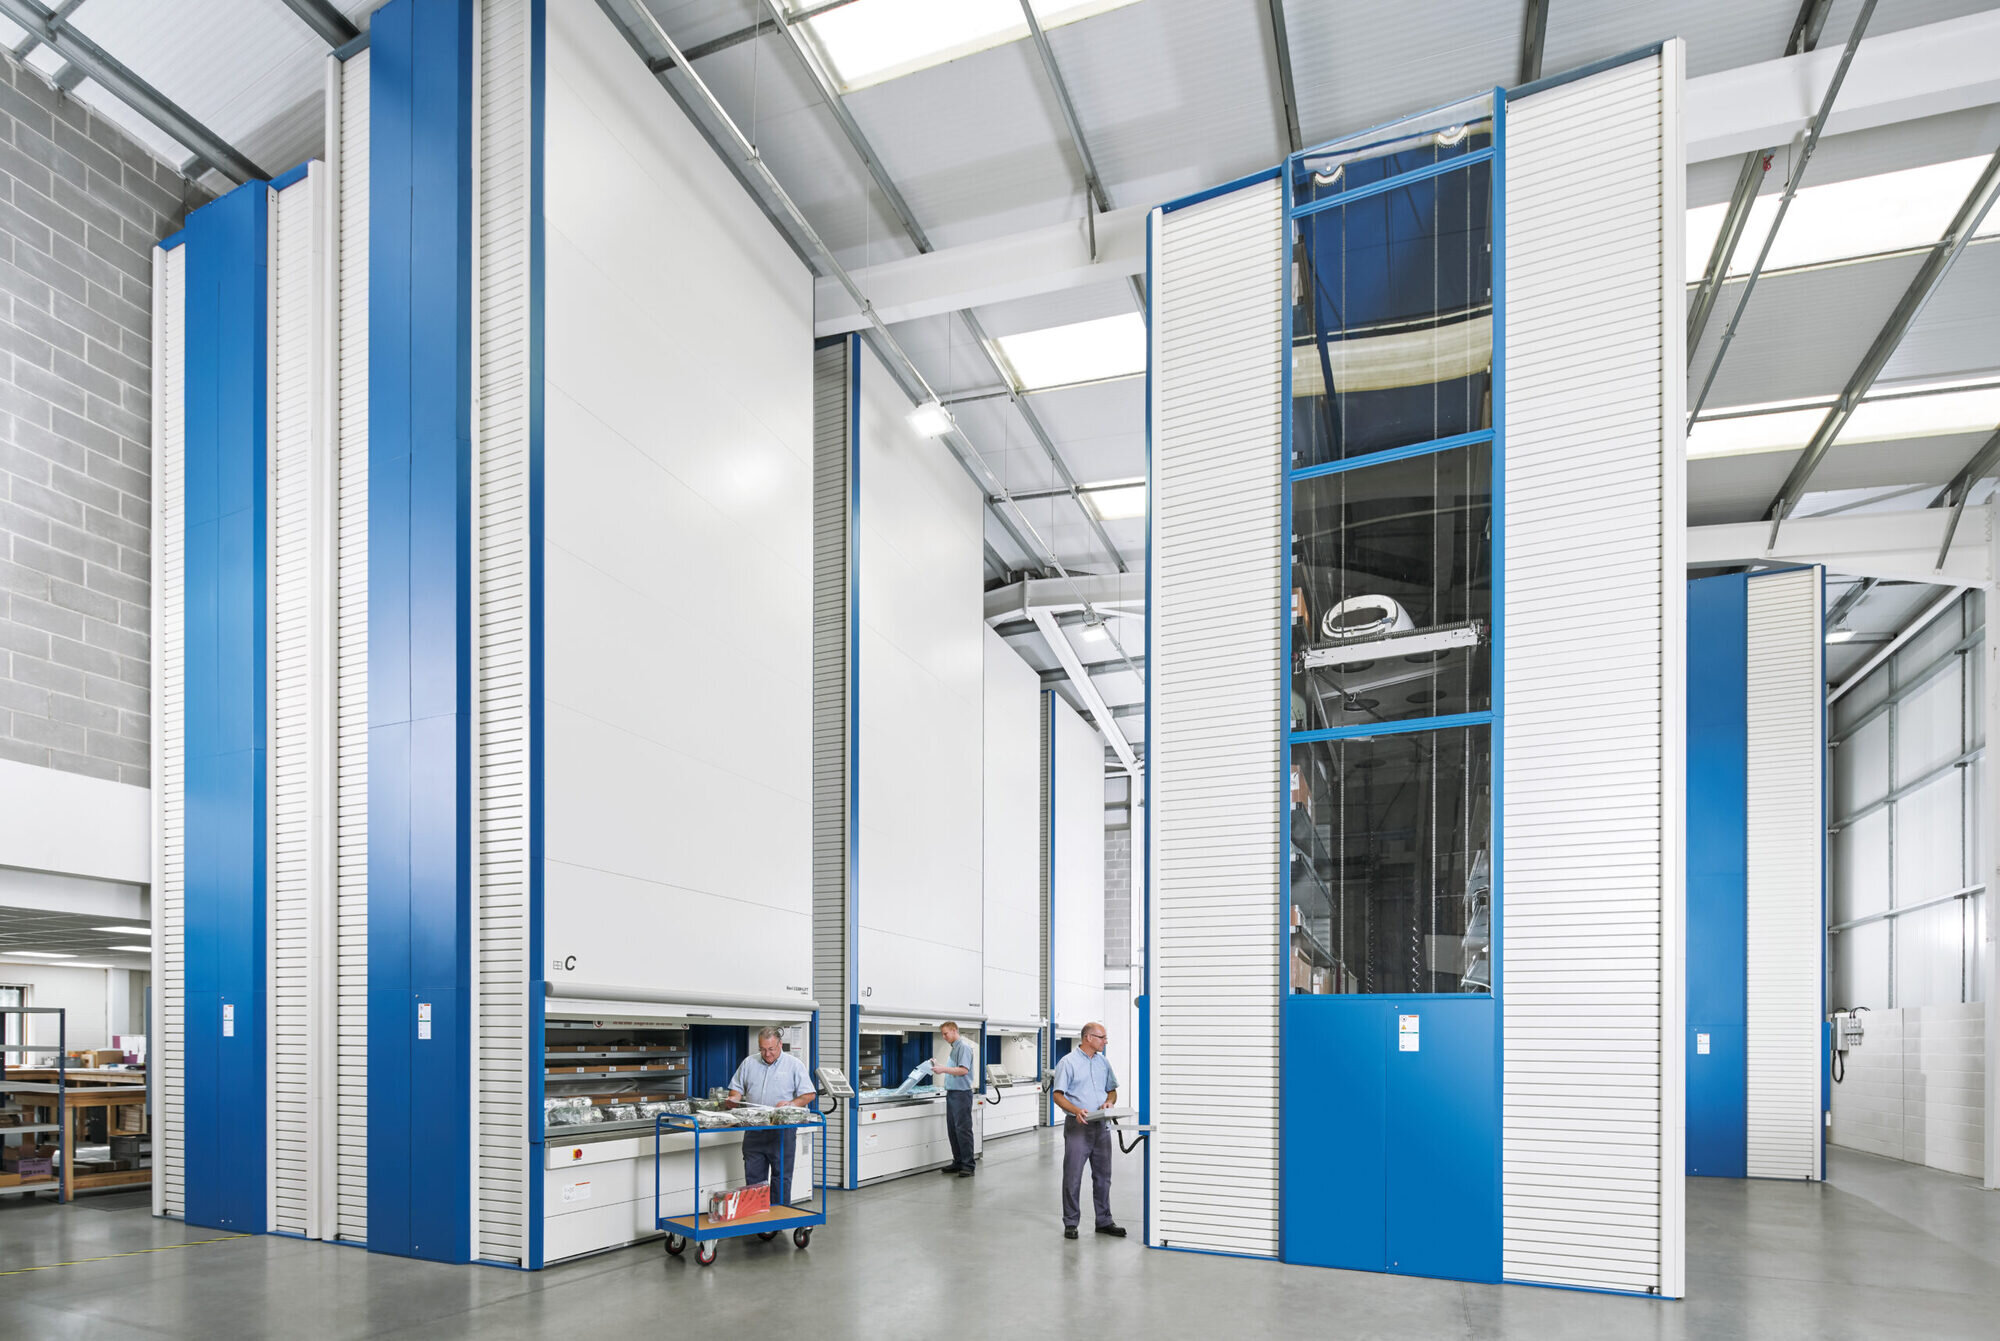 Industore's VLM (vertical lift modules) operating in a manufacturing and distribution setting